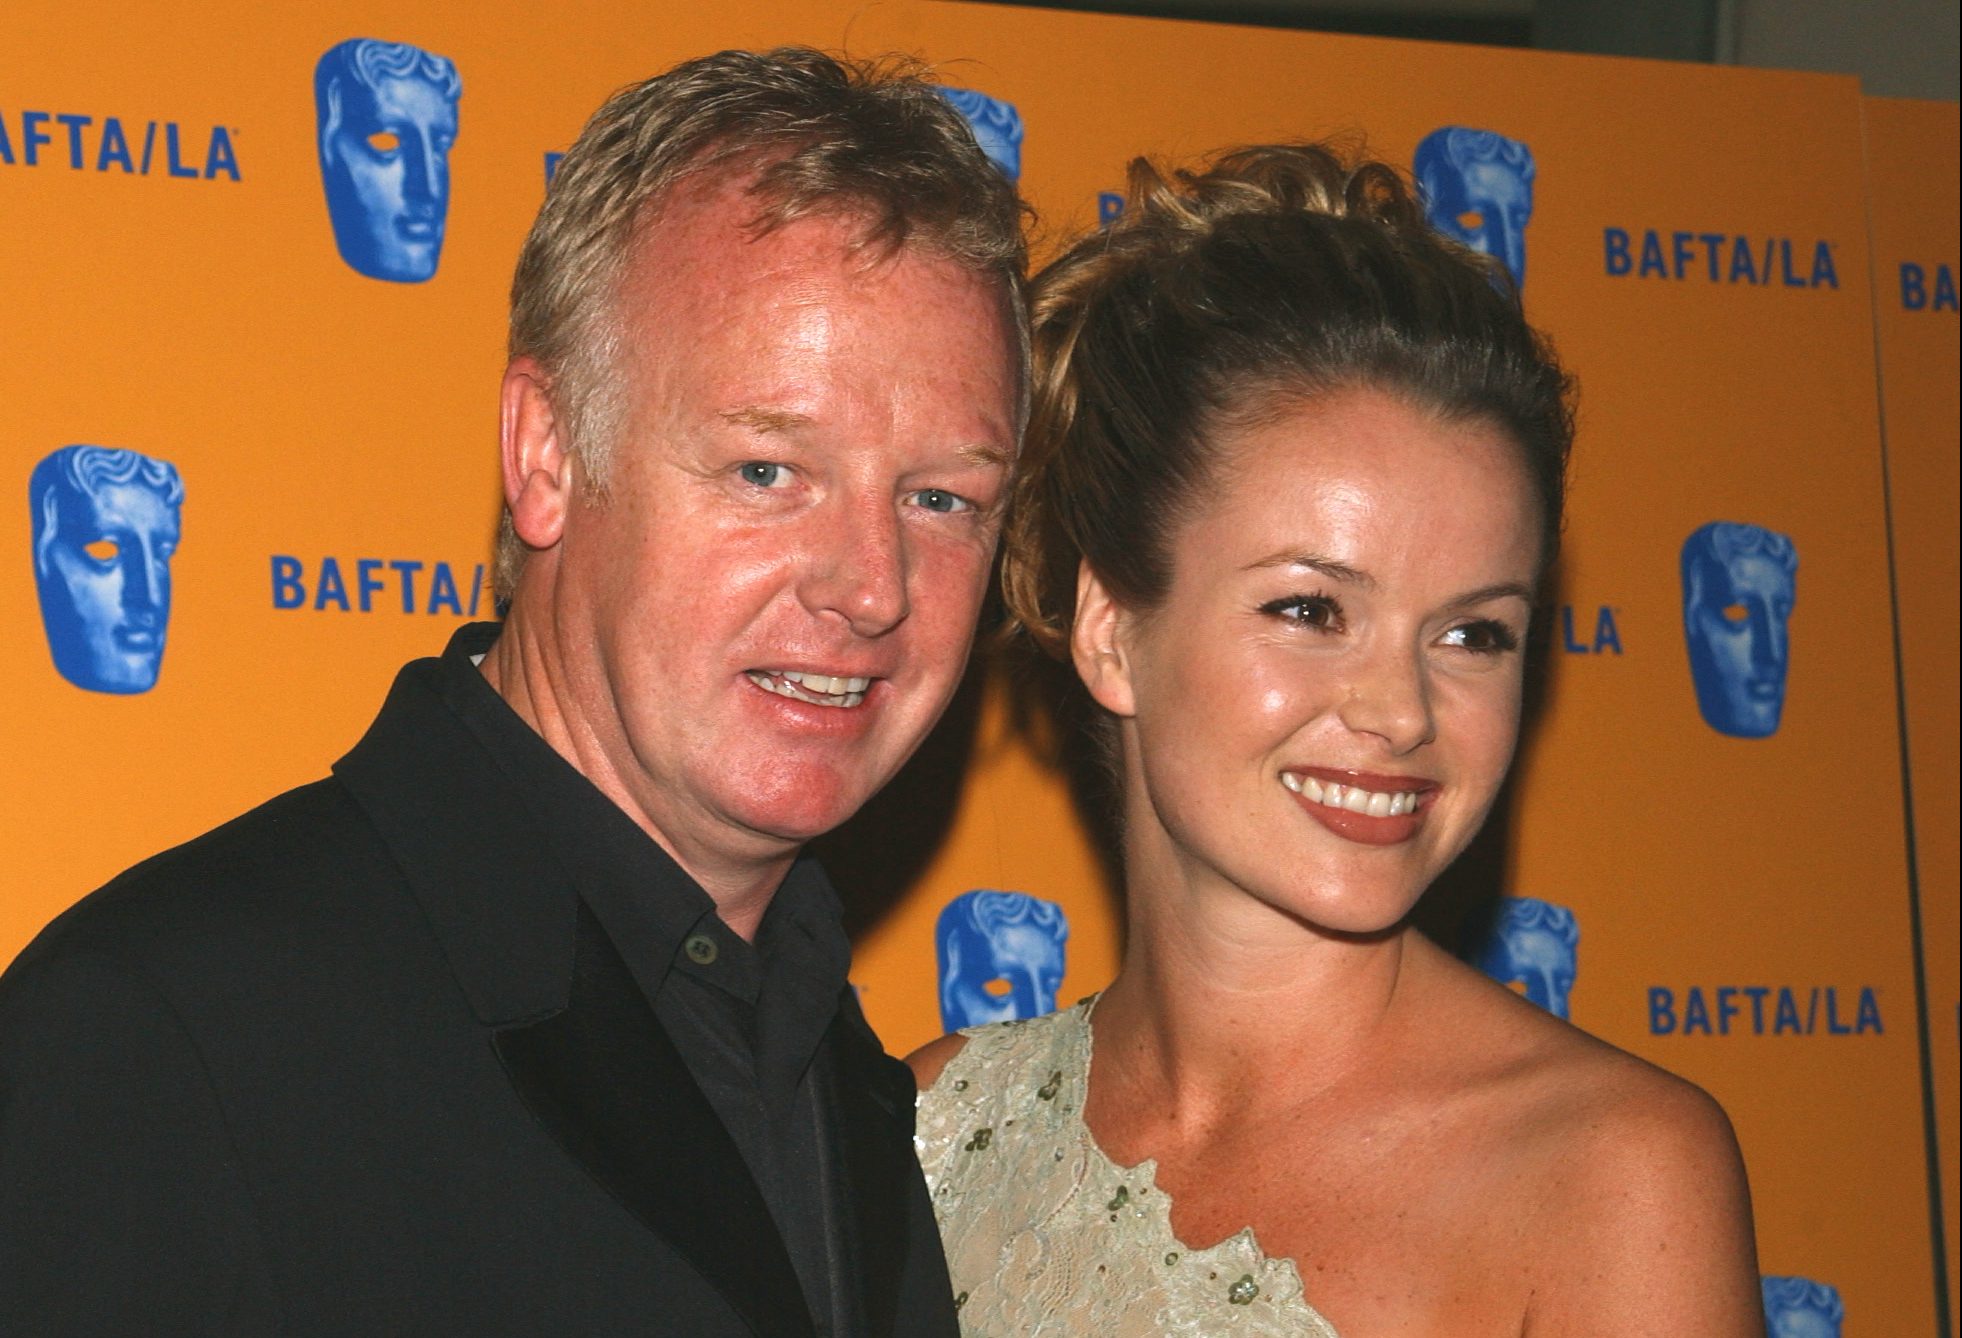 when was strictly's les dennis married to bgt's amanda holden?